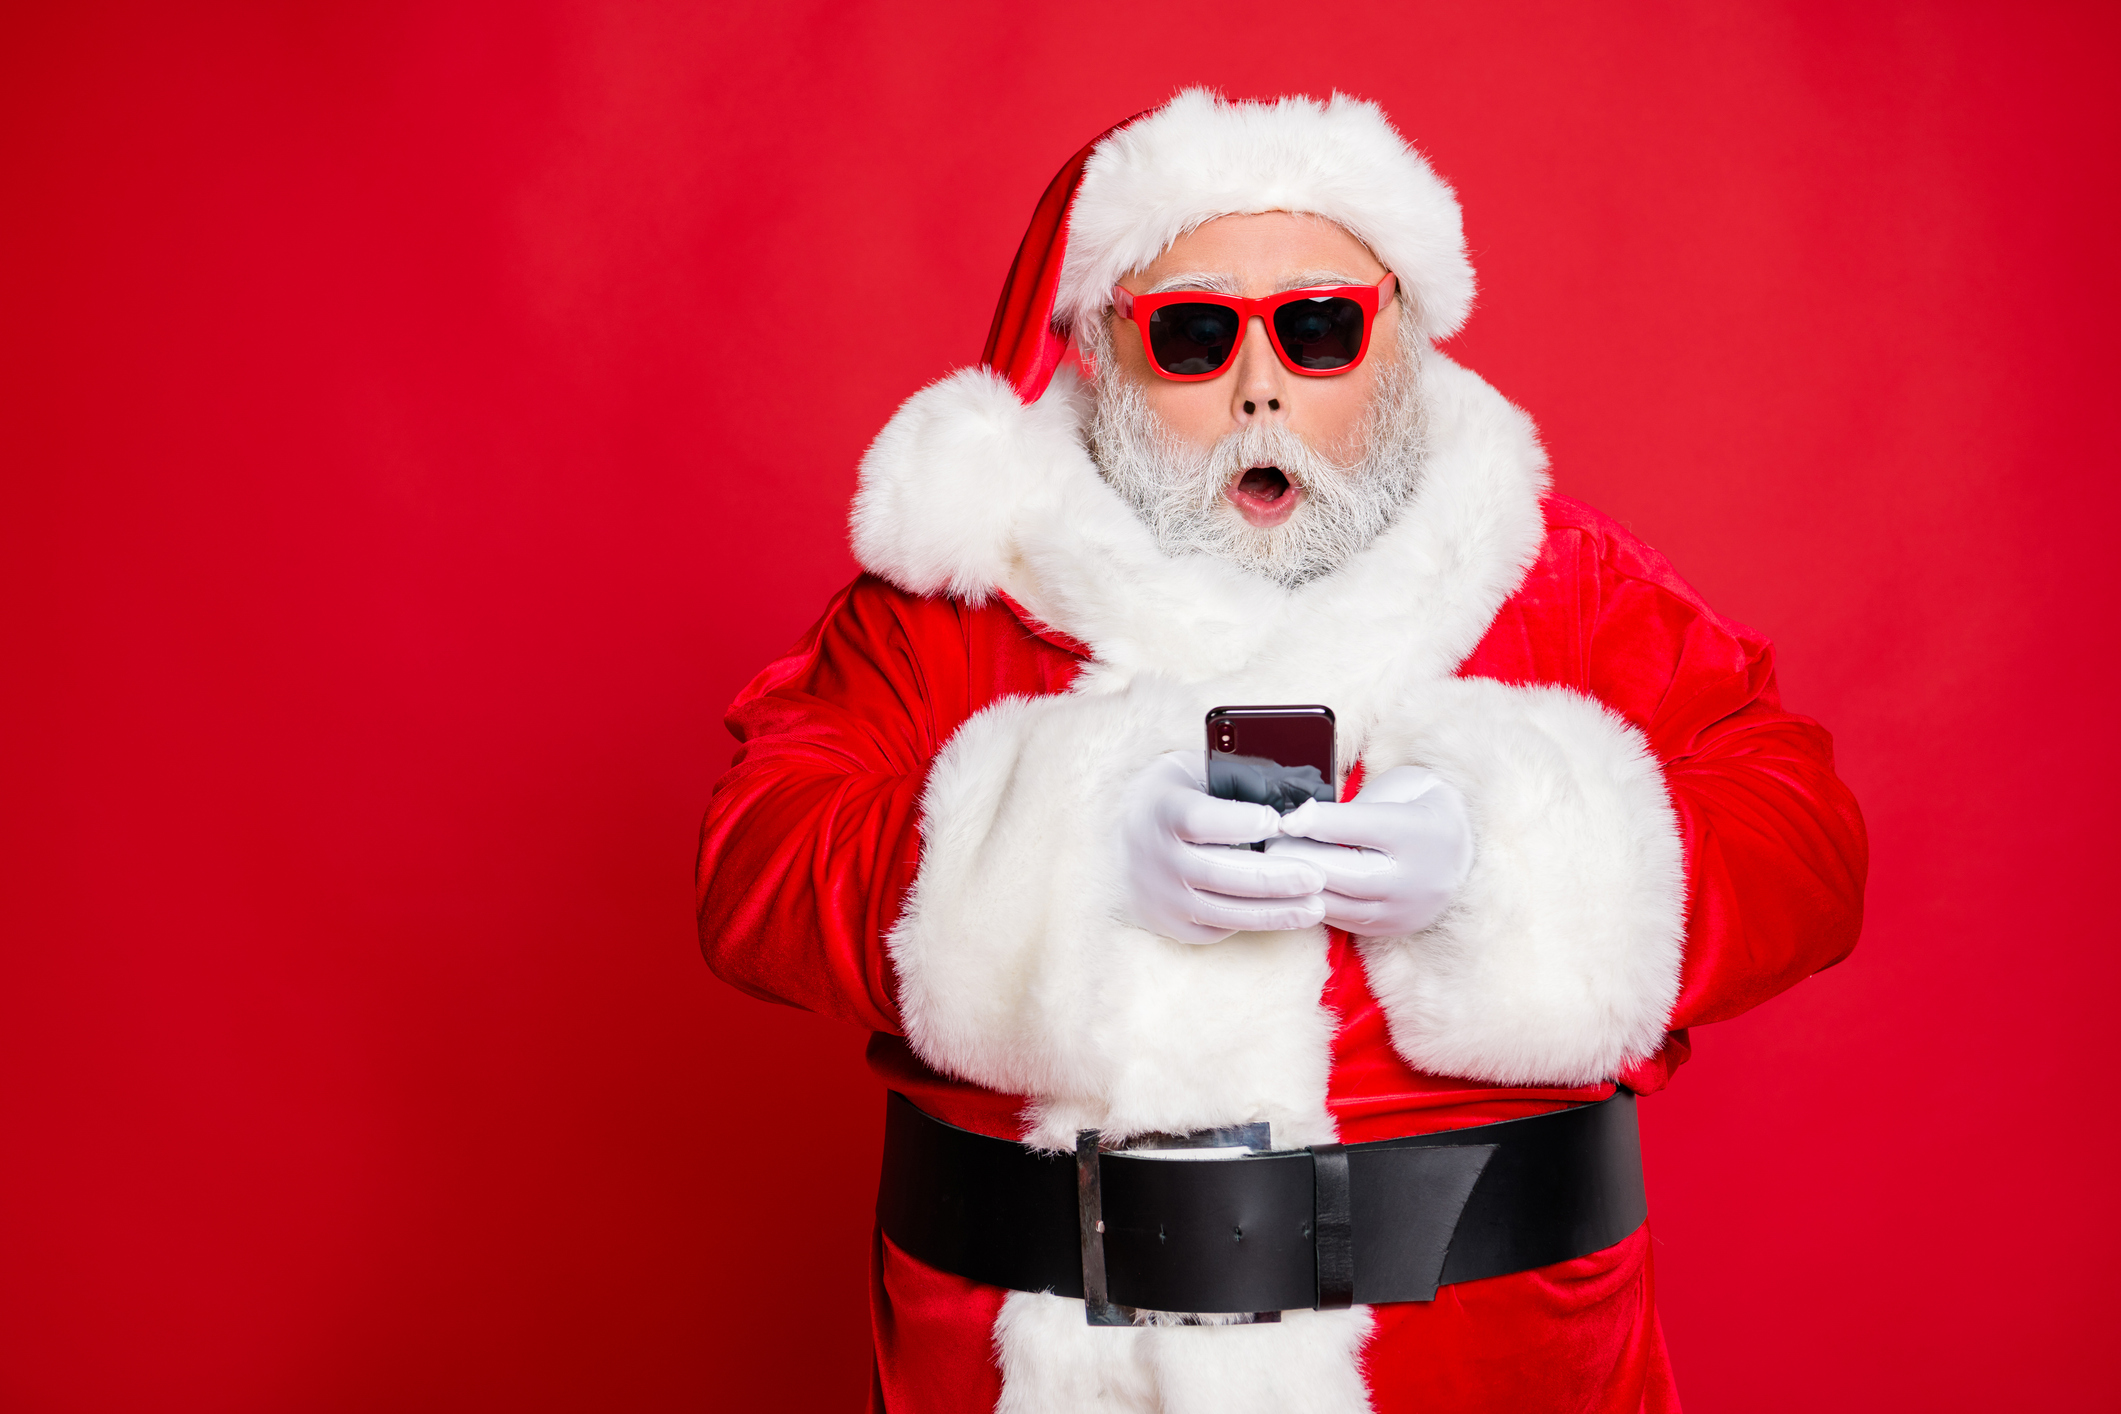 Red background with Santa Clause wearing red thick sunglasses and looking at his smartphone with a surprised look on his face